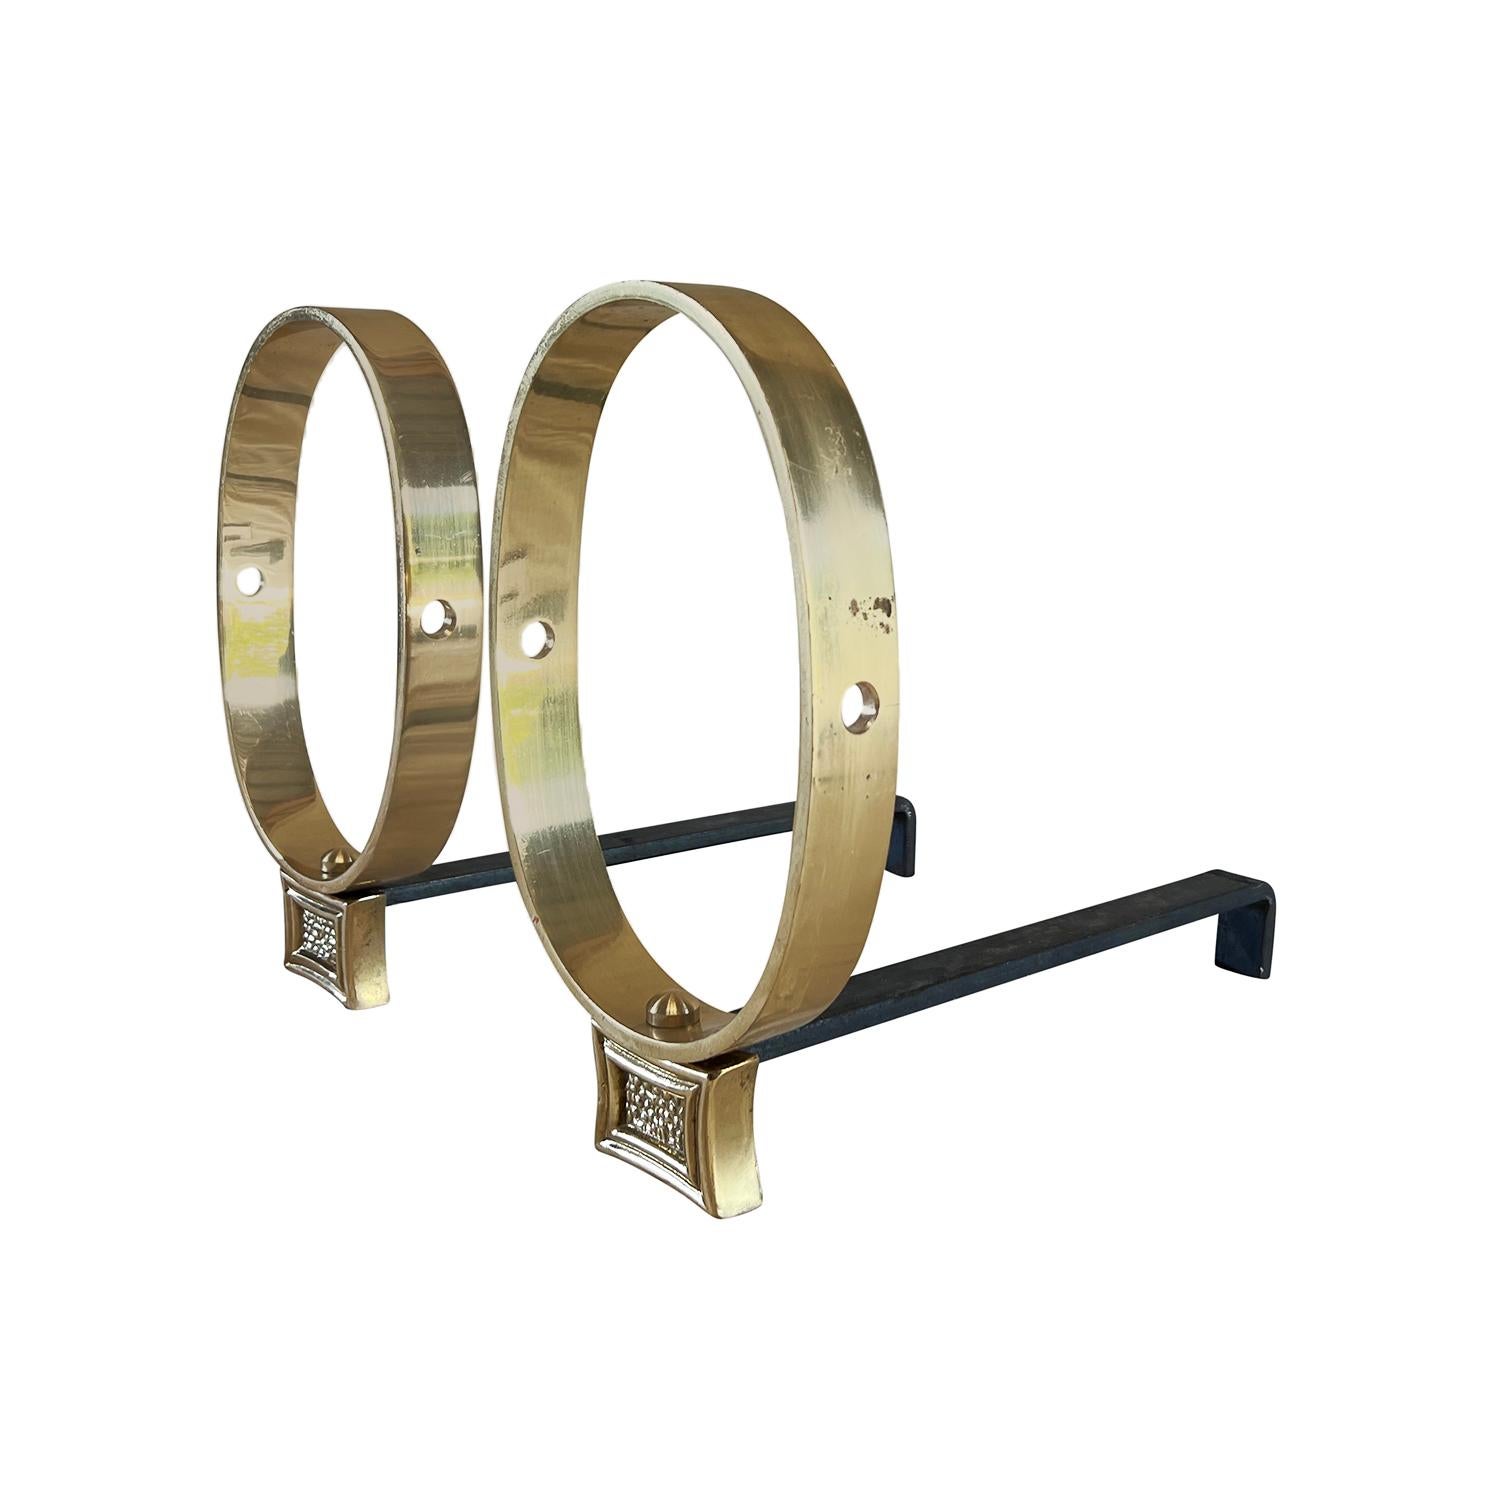 A vintage Mid-Century modern Italian pair of andirons made of hand crafted iron and polished brass, in good condition. Wear consistent with age and use. Circa 1940 - 1960, Italy.